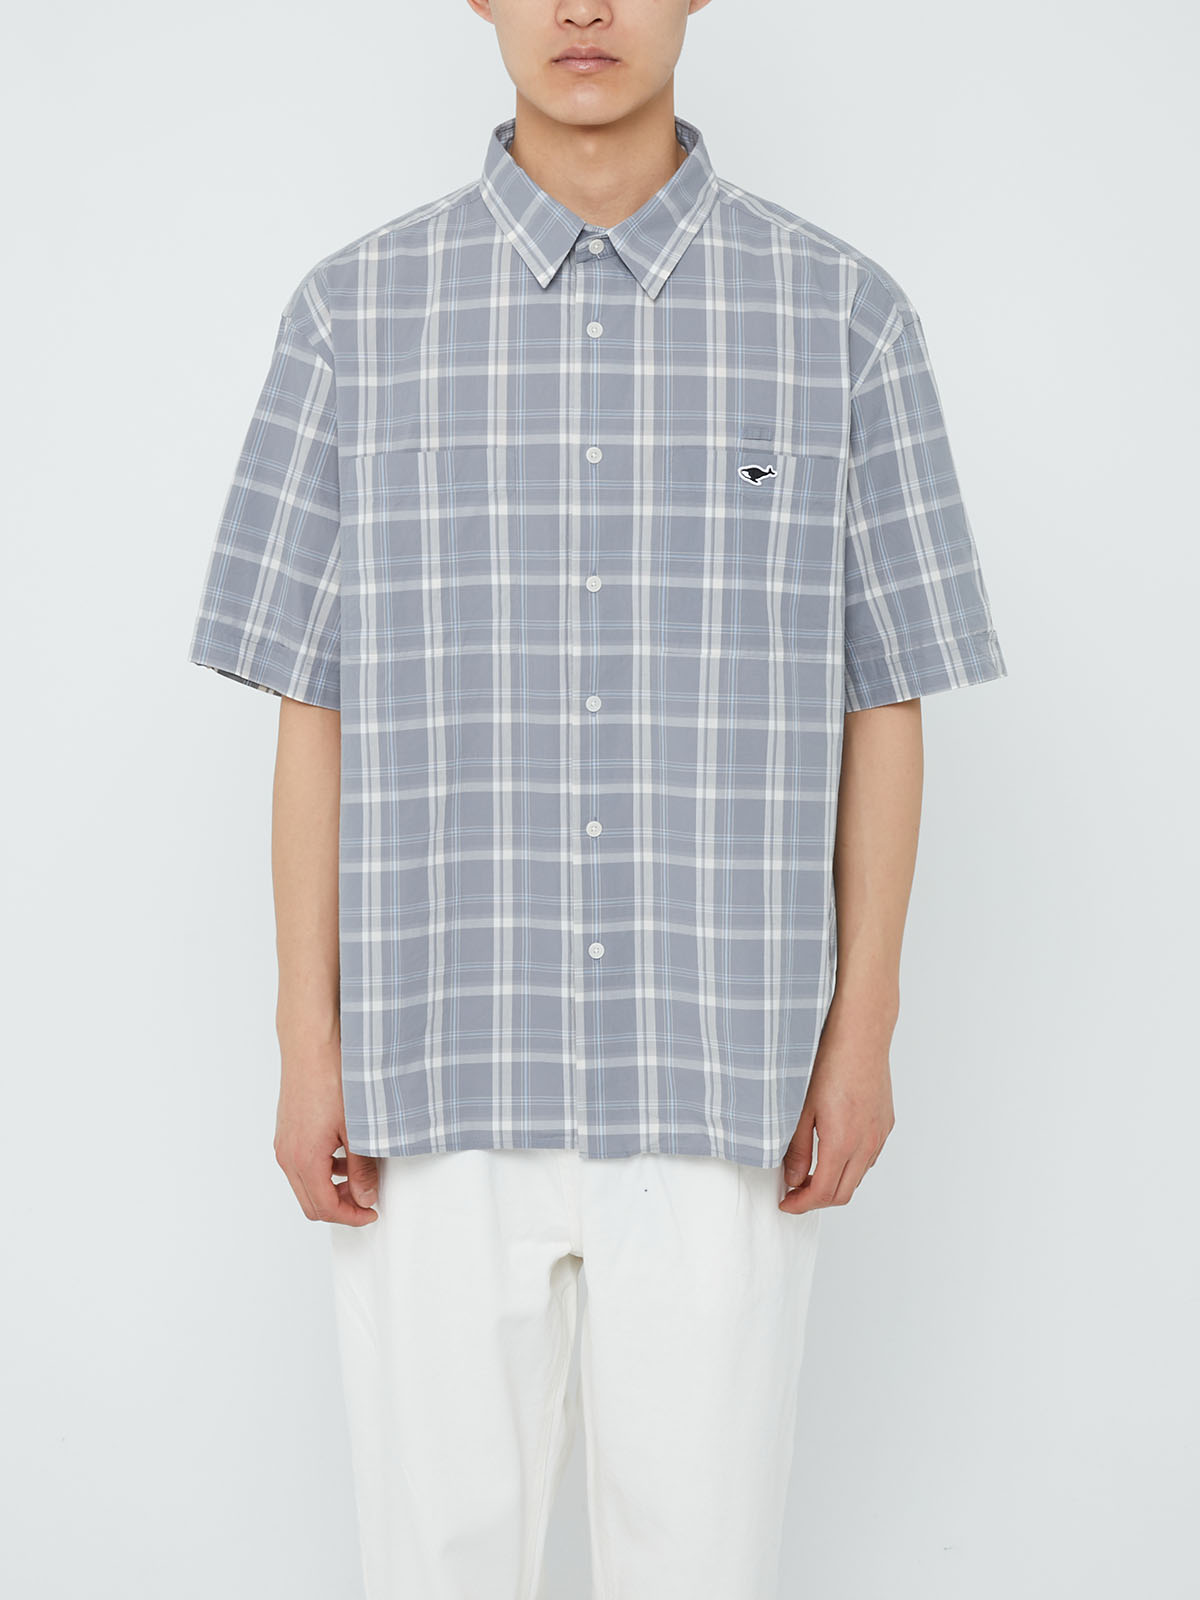 RELAXED S/S SHIRT (GREY CHECK)